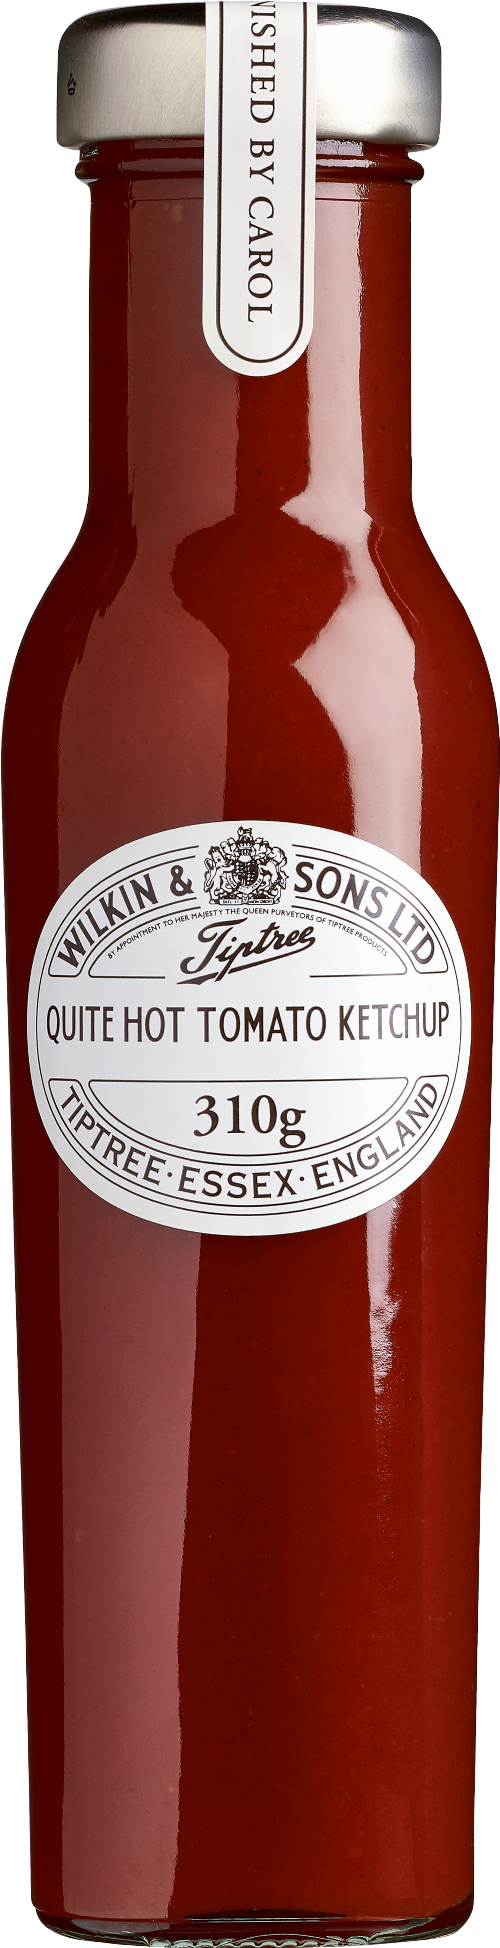 TIPTREE Quite Hot Tomato Ketchup 310g